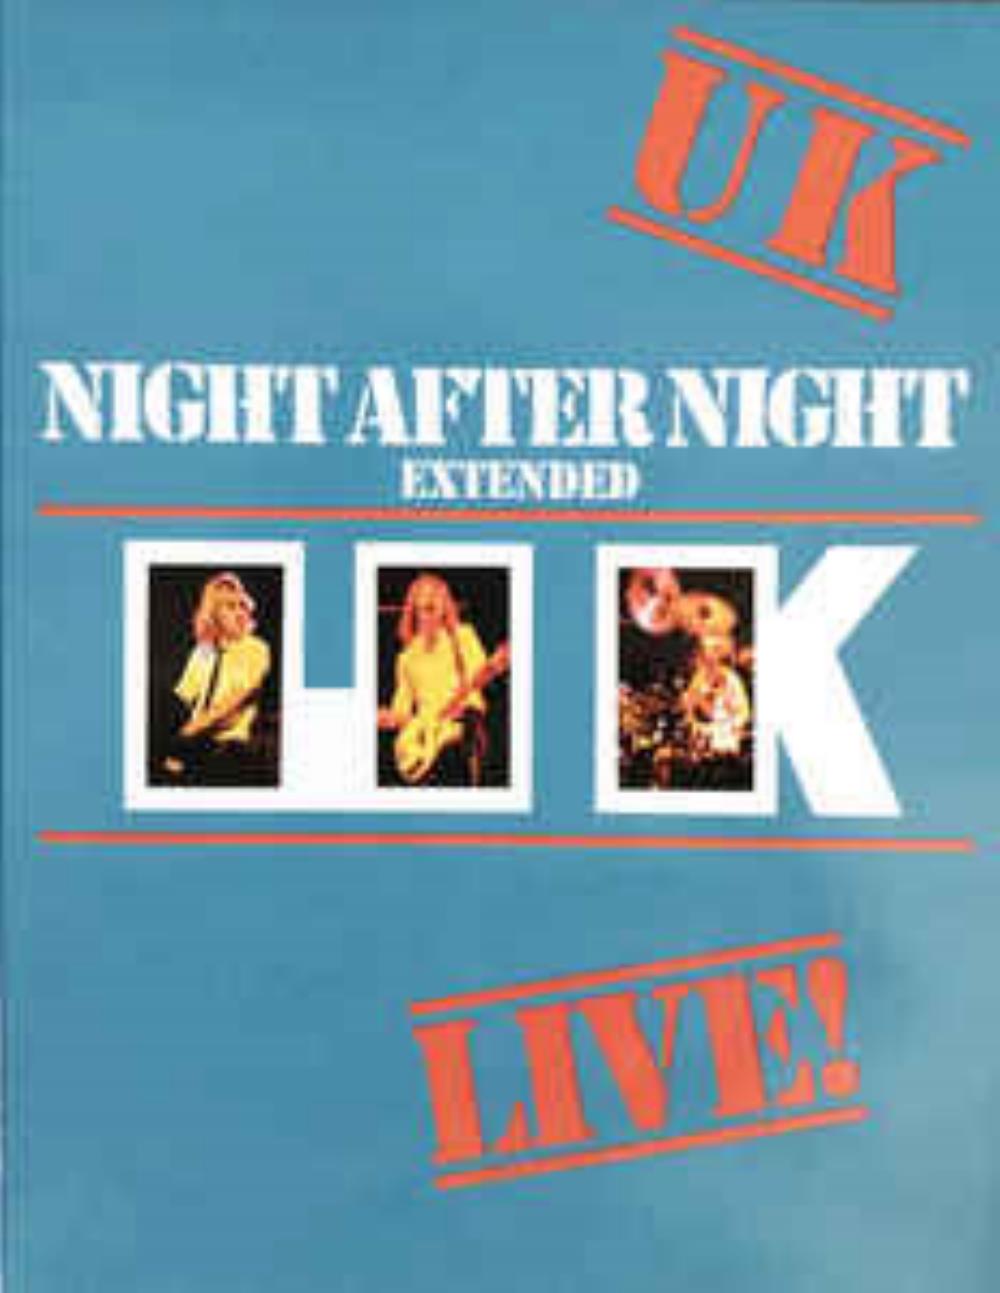 UK Night After Night Extended album cover